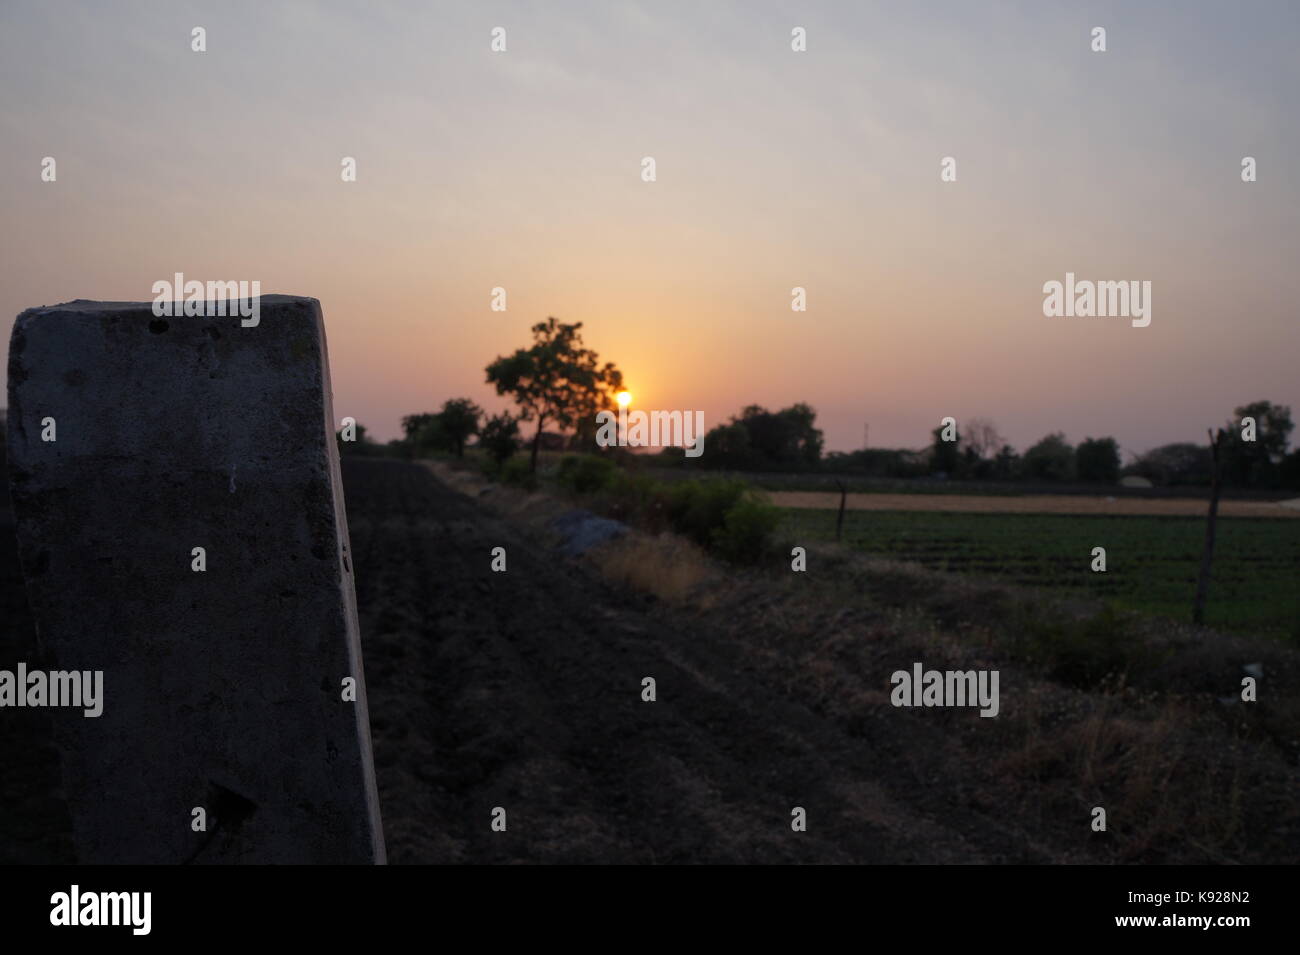 Sunsets at a distance Stock Photo